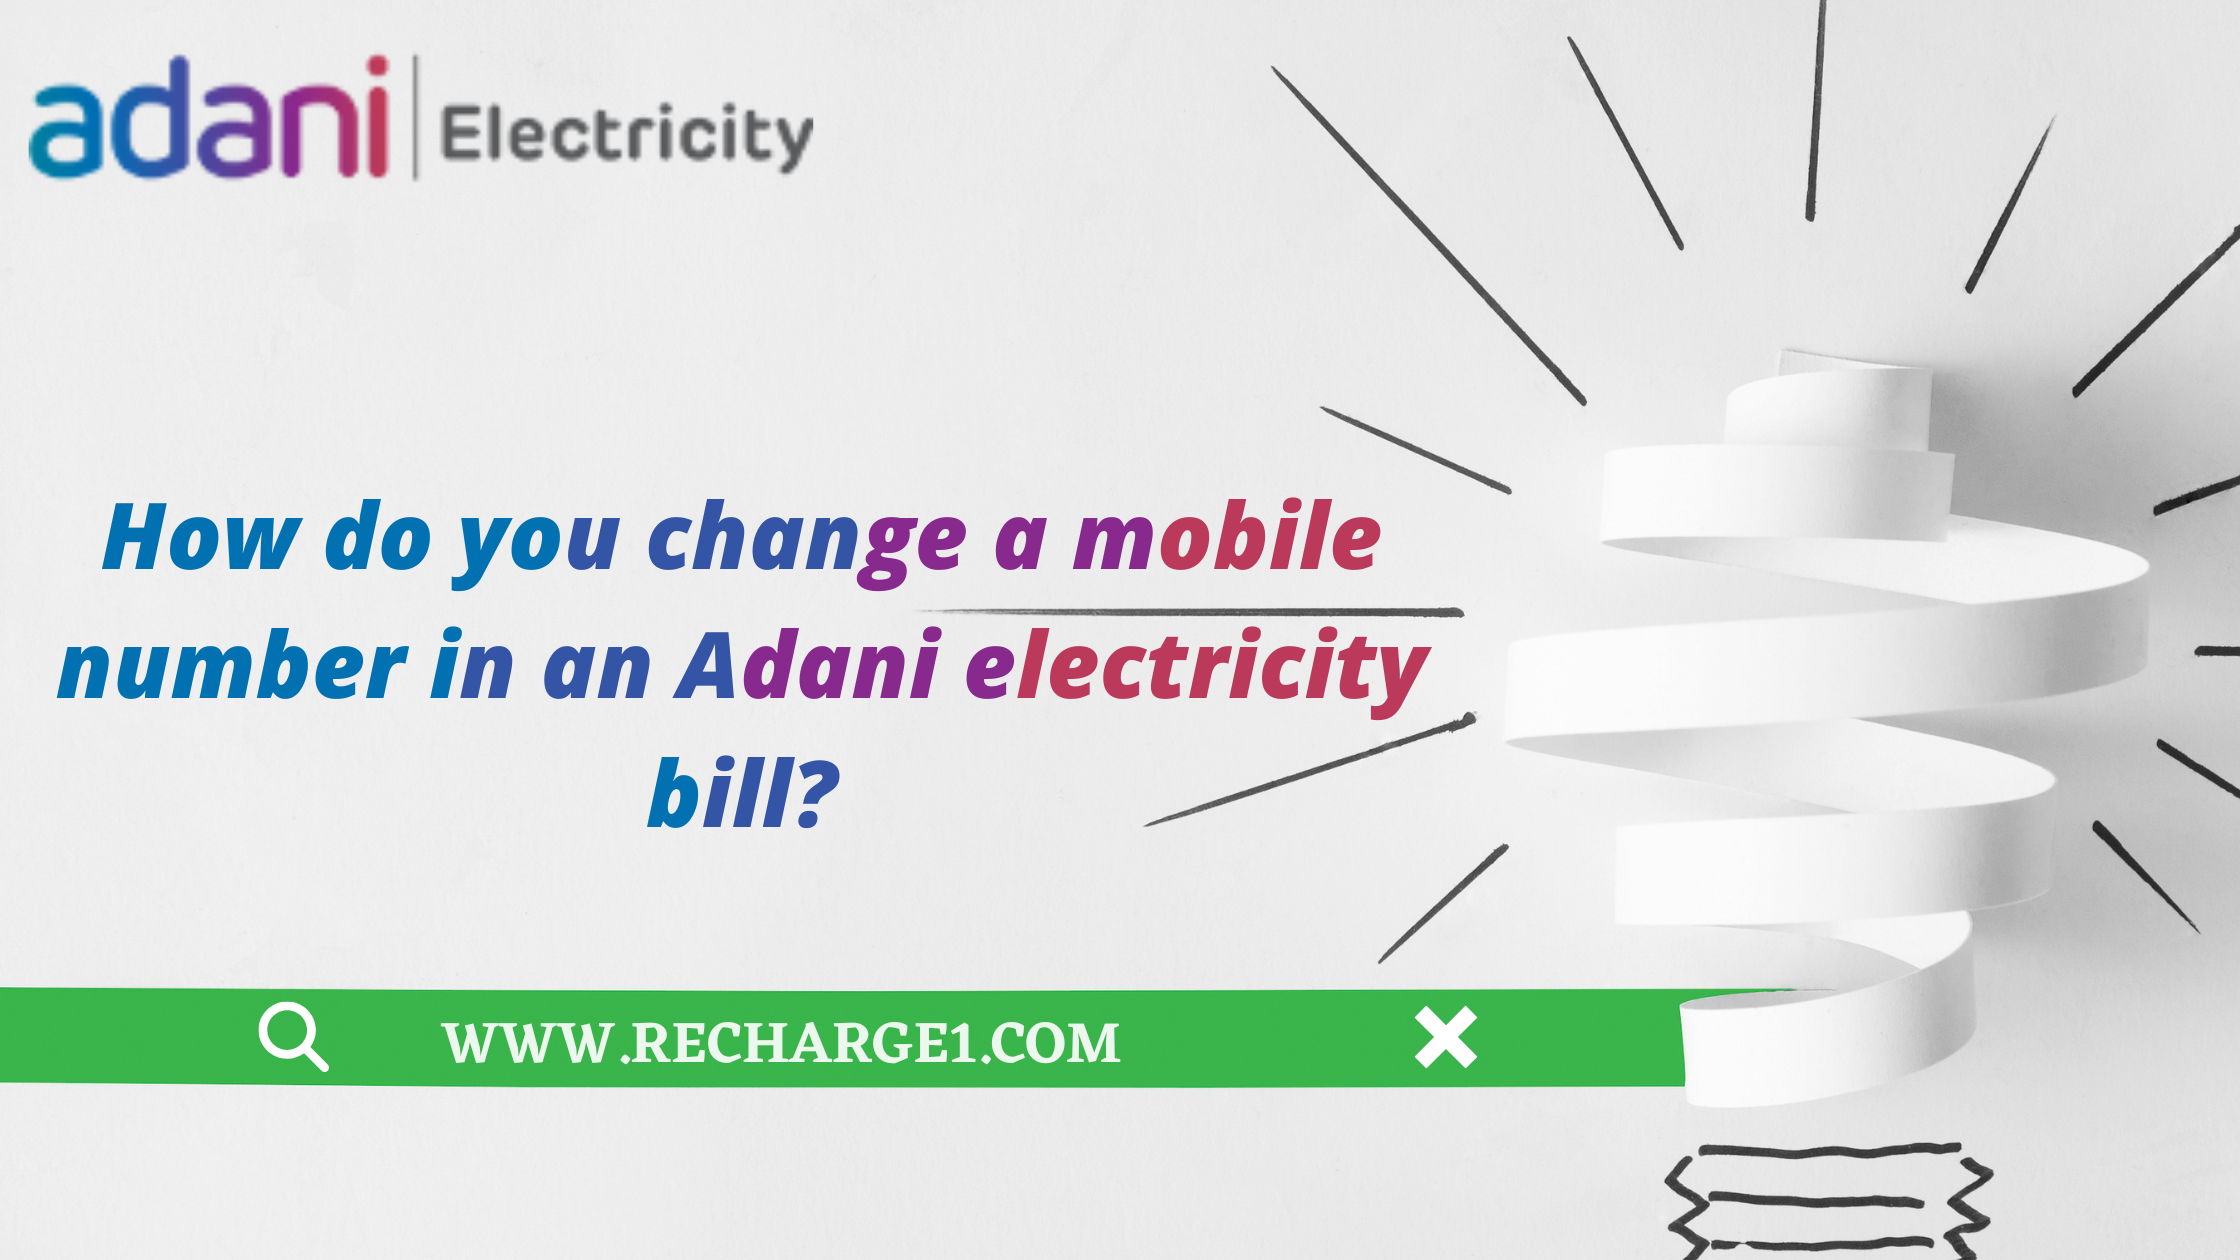 How do you change a mobile number in an Adani electricity bill?